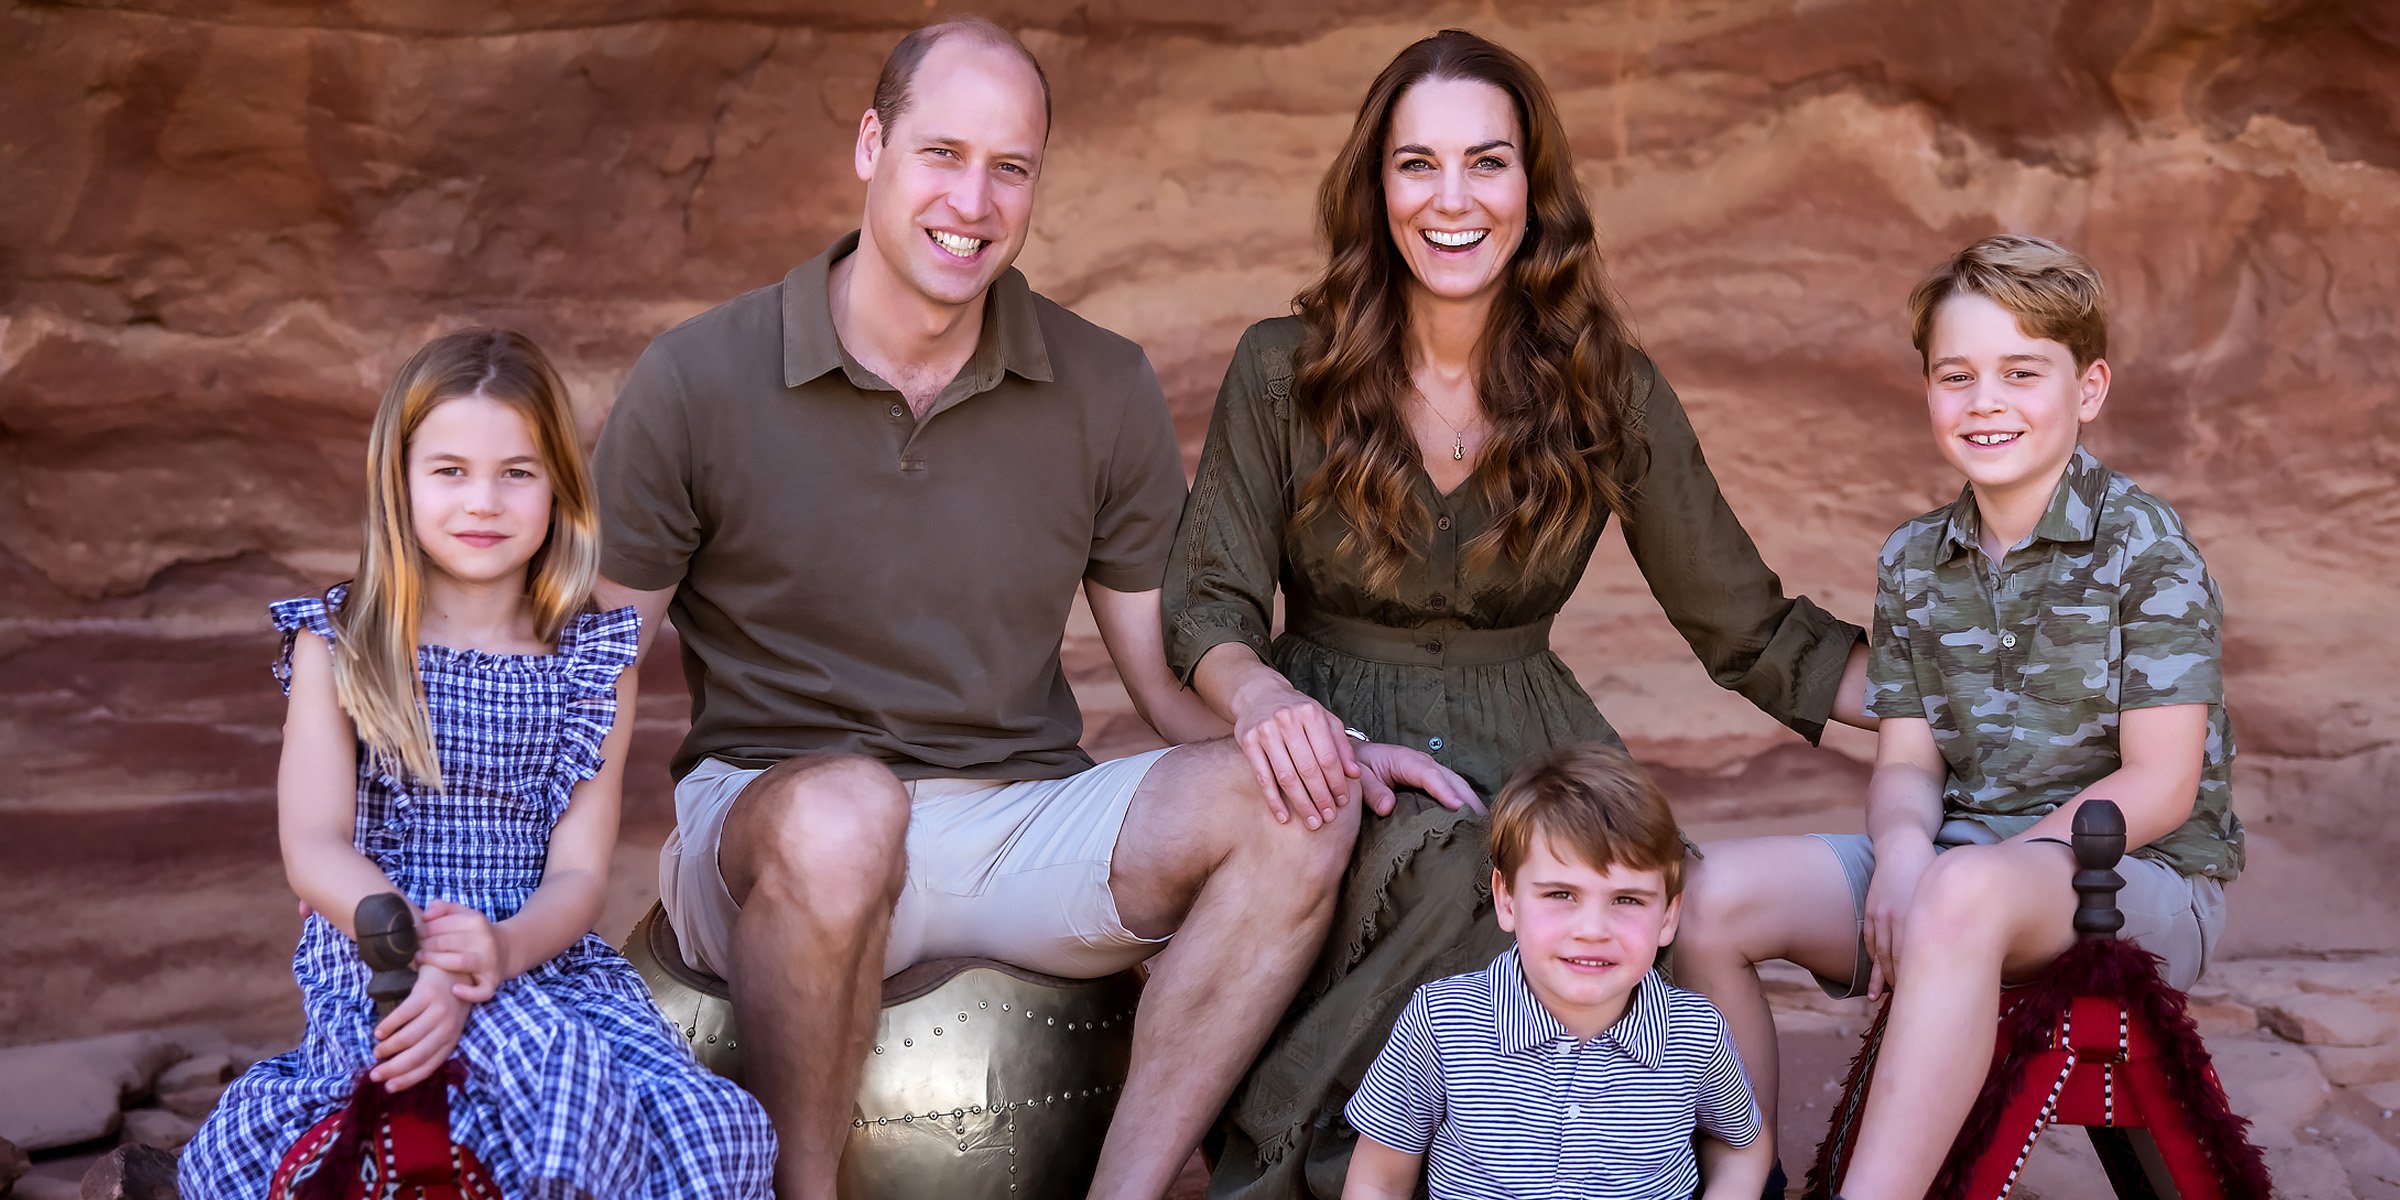 The Duke and Duchess of Cambridge with their three children for their 2021 Christmas Portrait, captured in Jordan | Source: Getty Images